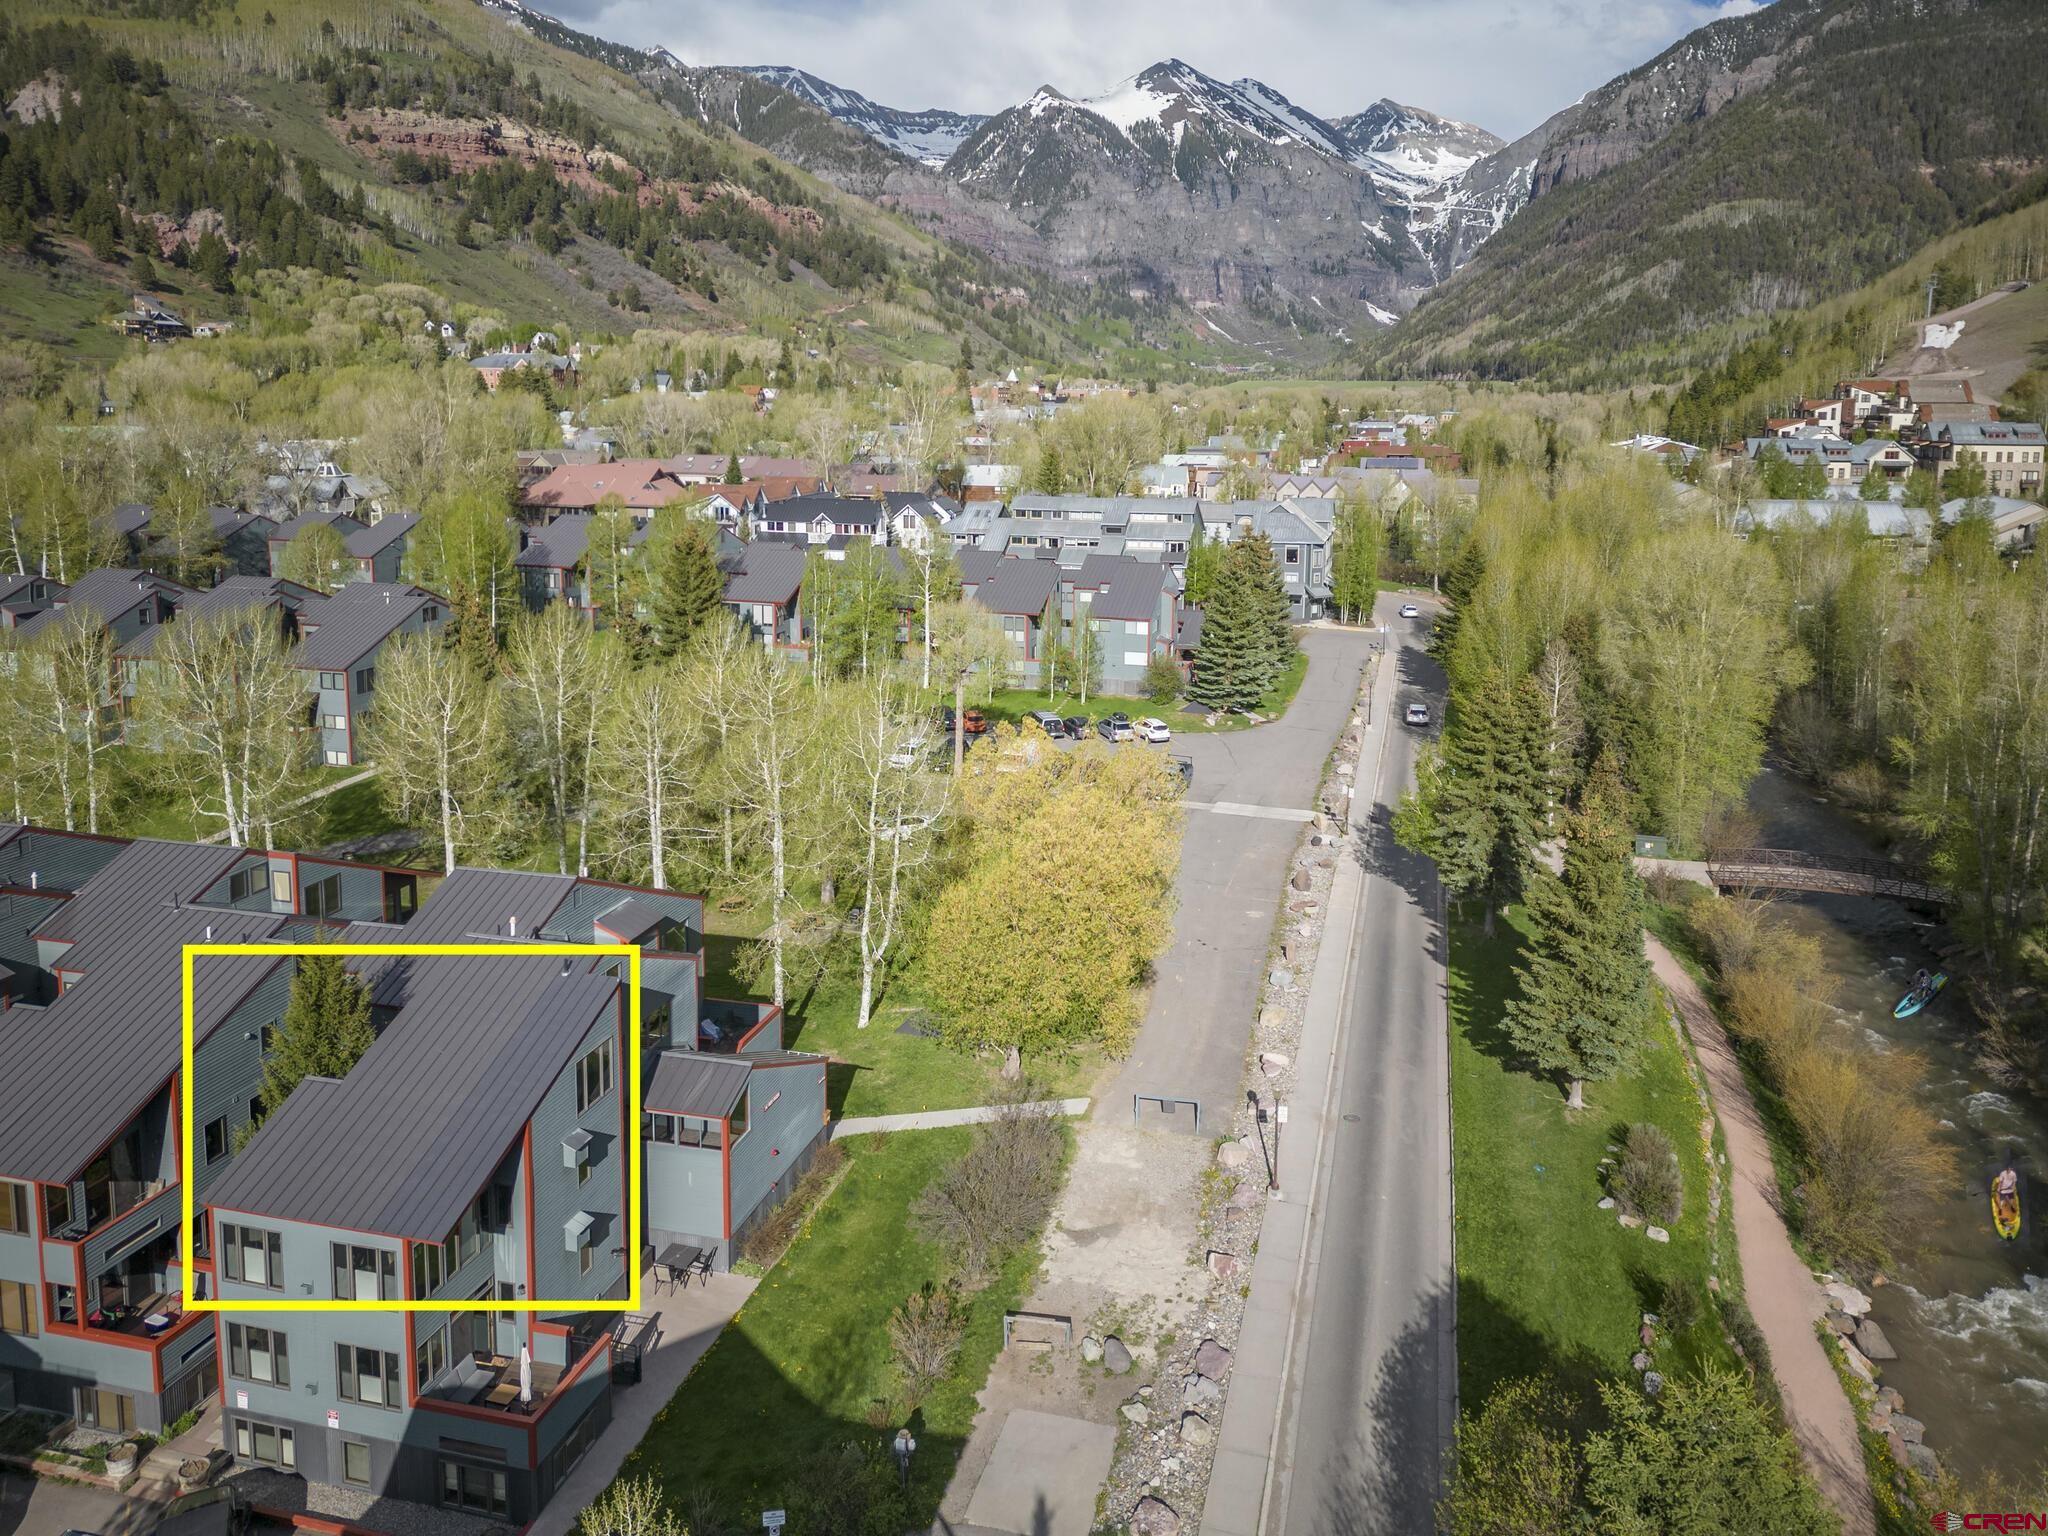 This is what you’ve been waiting for!  The rare opportunity to own arguably the best location at Telluride Lodge! Telluride Lodge is known for its premiere ski access, spacious floorplans, outdoor space and lower homeowners dues.  No detail was overlooked during a complete top-to bottom redevelopment and expansion by Richardson Construction. Positioned directly across from Coonskin/Chair 7 and San Miguel River Trail, steps from the market and Davis & Pacific Street restaurant and shops.  Unit 542 is approximately 1,236SF with three levels of elevated views, light and luxury appointments.  The upper most level is currently set up as office/flex space which can be reconfigured for additional sleeping space.  Extensive owner storage and a laundry closet are on this top level . The mid-level has a queen bedroom with vaulted ceilings, south-facing sun and tremendous views of the ski area.  A ¾ bath with custom built-ins and steam shower accommodates guests. The primary bedroom has thoughtful built-ins for two, east-facing views through a large picture window and ensuite bath with additional built-ins and steam shower.  This main living level has the same appointments, chef’s kitchen with open concept living/dining areas, gas fireplace and featuring vaulted ceilings, spectacular light and mountain views.   542 is being offered together with adjoining residence #541 in CREN MLS#801100 for a 6-bedroom slope-side compound.   Telluride Lodge Location/Amenities:  Along Galloping Goose Town Shuttle Loop Directly Across from ski lift Across from San Miguel River and River Trail 5+ acres of greenery, shared grills/picnic table Mountain Views Steps from restaurants, shops, ski rentals Common hot tubs & spa facility  Residence Amenities: Completely remodeled from the studs by Richardson Construction with insulation, drywall, in-floor radiant heat, recessed lighting, fire suppression, AV/data wiring,  Gourmet kitchens with custom milled alder cabinetry, solid surface countertops, stainless  Appliances include Thermador gas island cooktops, Thermador & Bosch wall oven/microwaves; Bosch dishwashers, wine coolers. 2 GCE parking spaces Hallway ski storage and multiple interior owner storage closets Spacious deck looking up to ski area and east to Gondola and Box canyon  This property does not have a Town of Telluride STR license, is not rented and is in beautifully maintained condition.